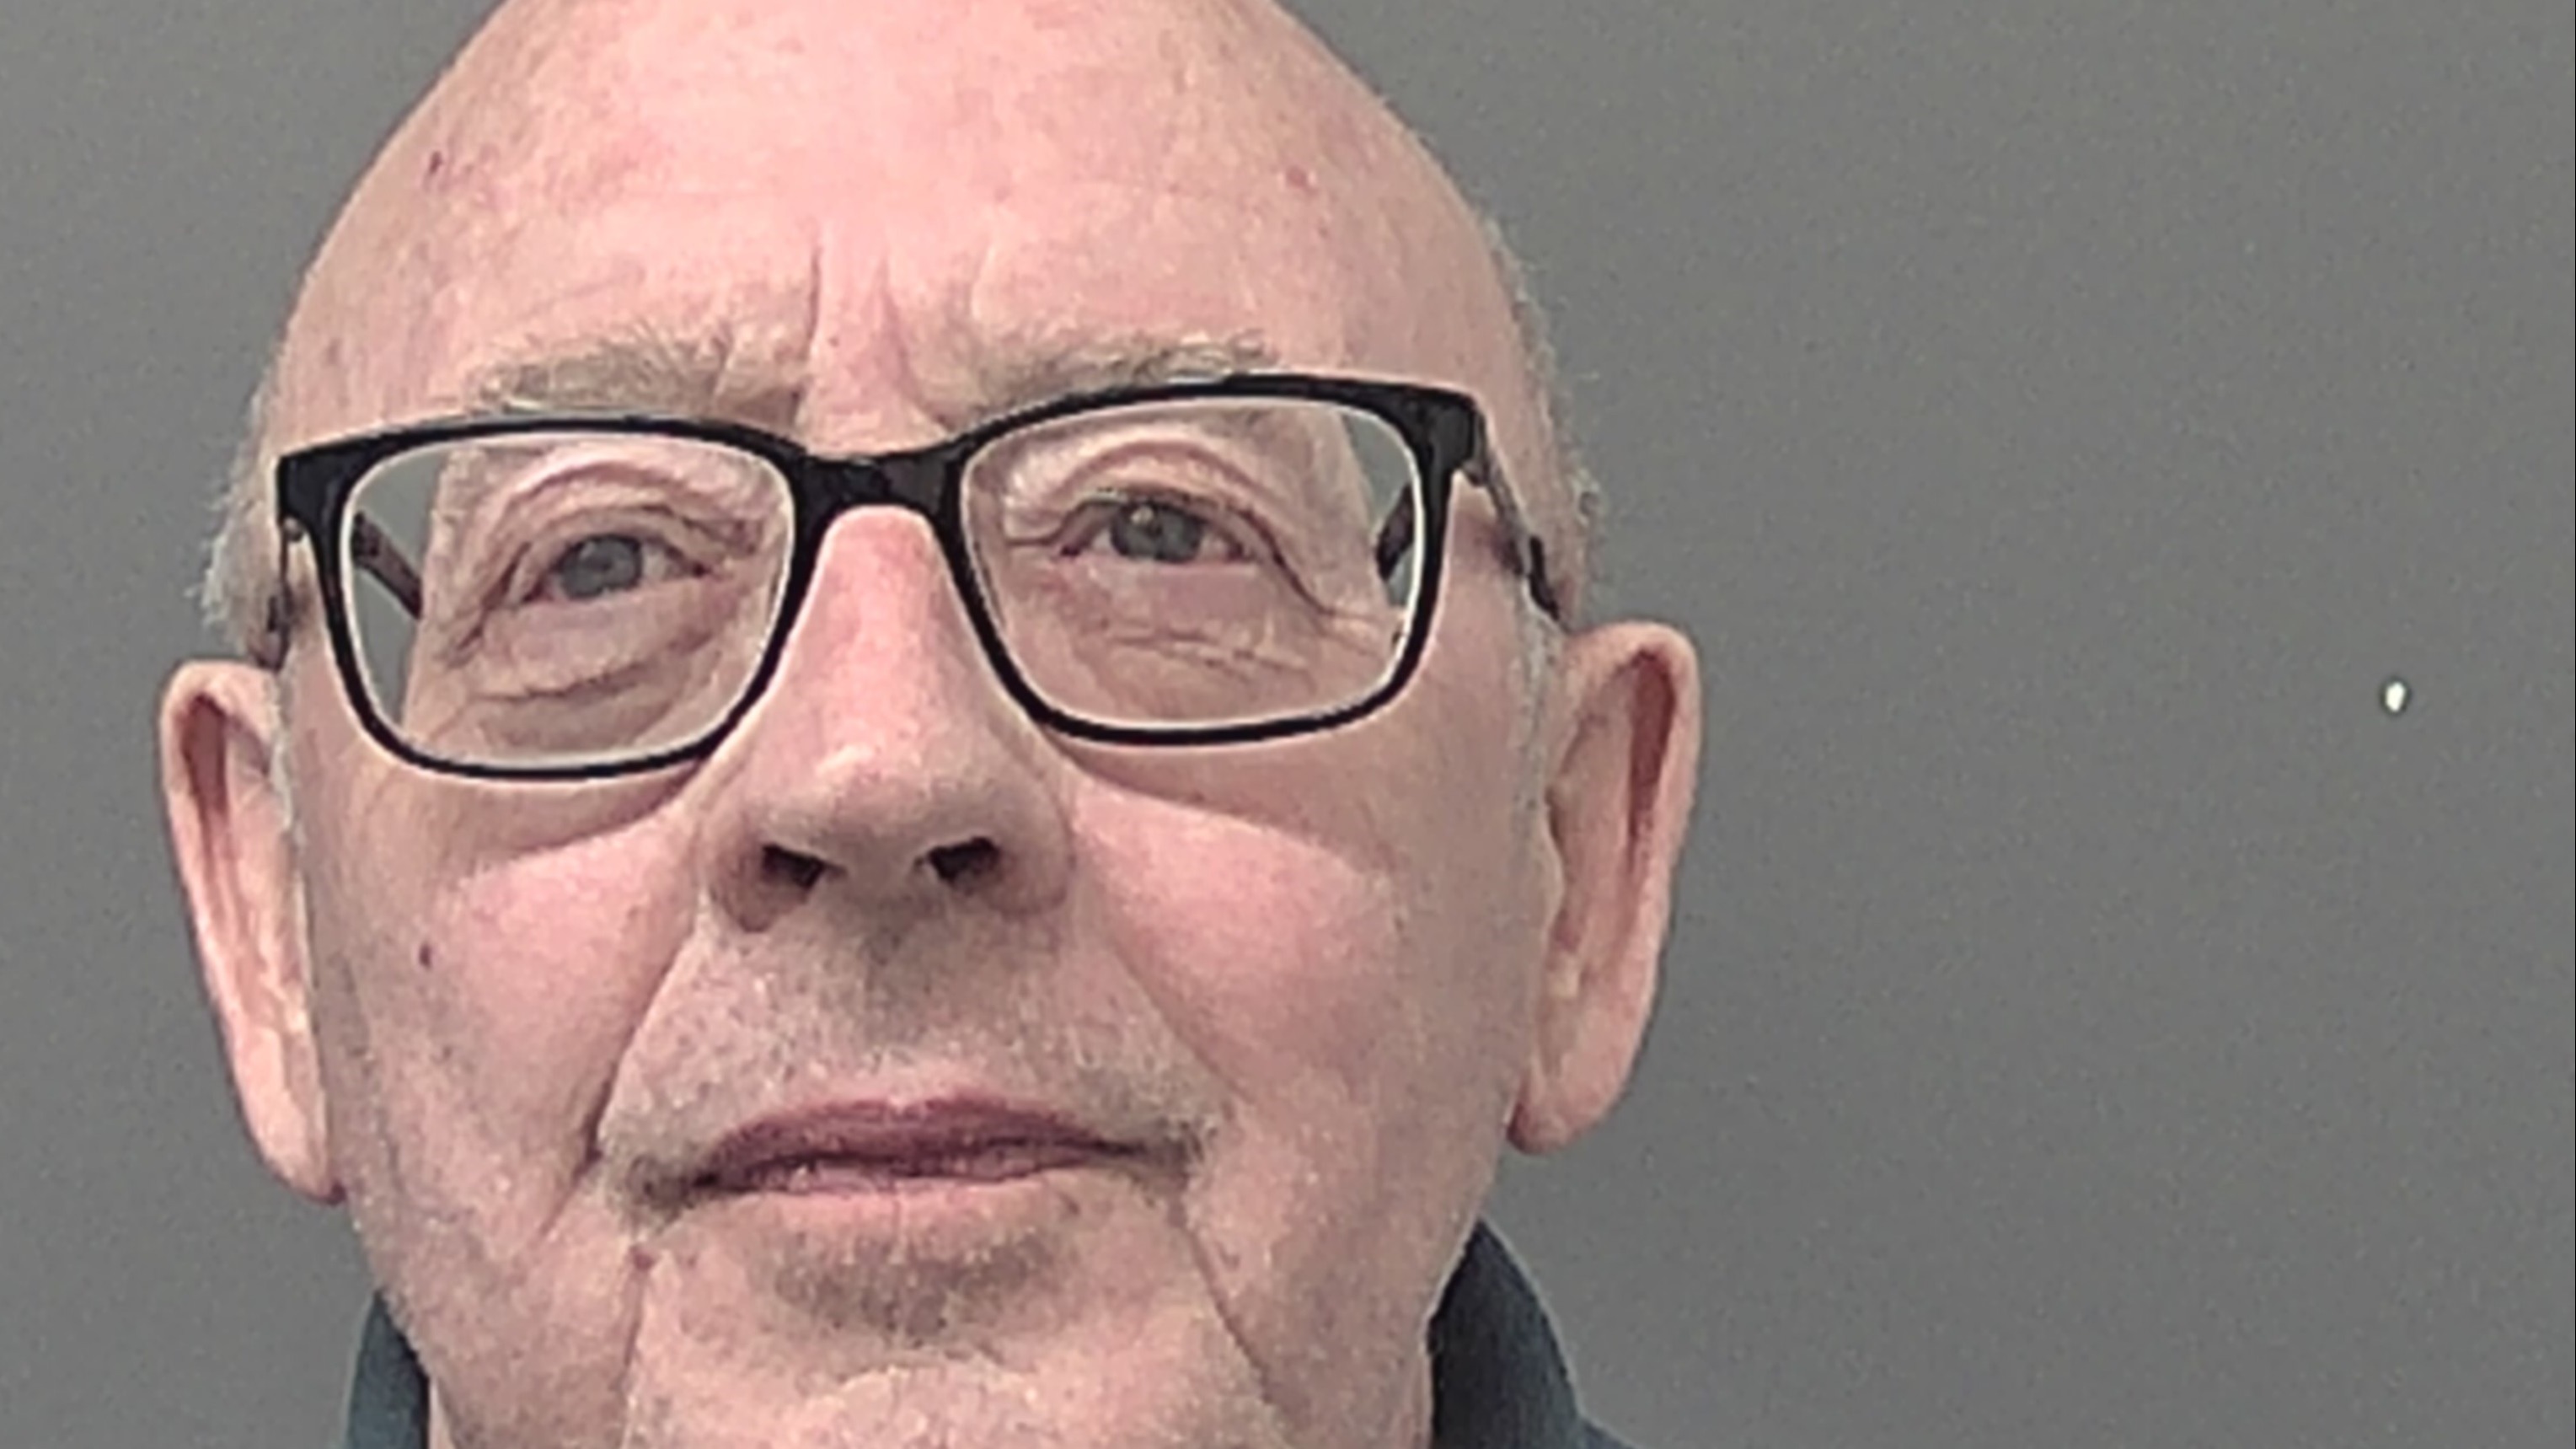 Rus Sex16 - Wetwang pensioner 'porn baron' jailed for masterminding illegal sex video  business | ITV News Calendar